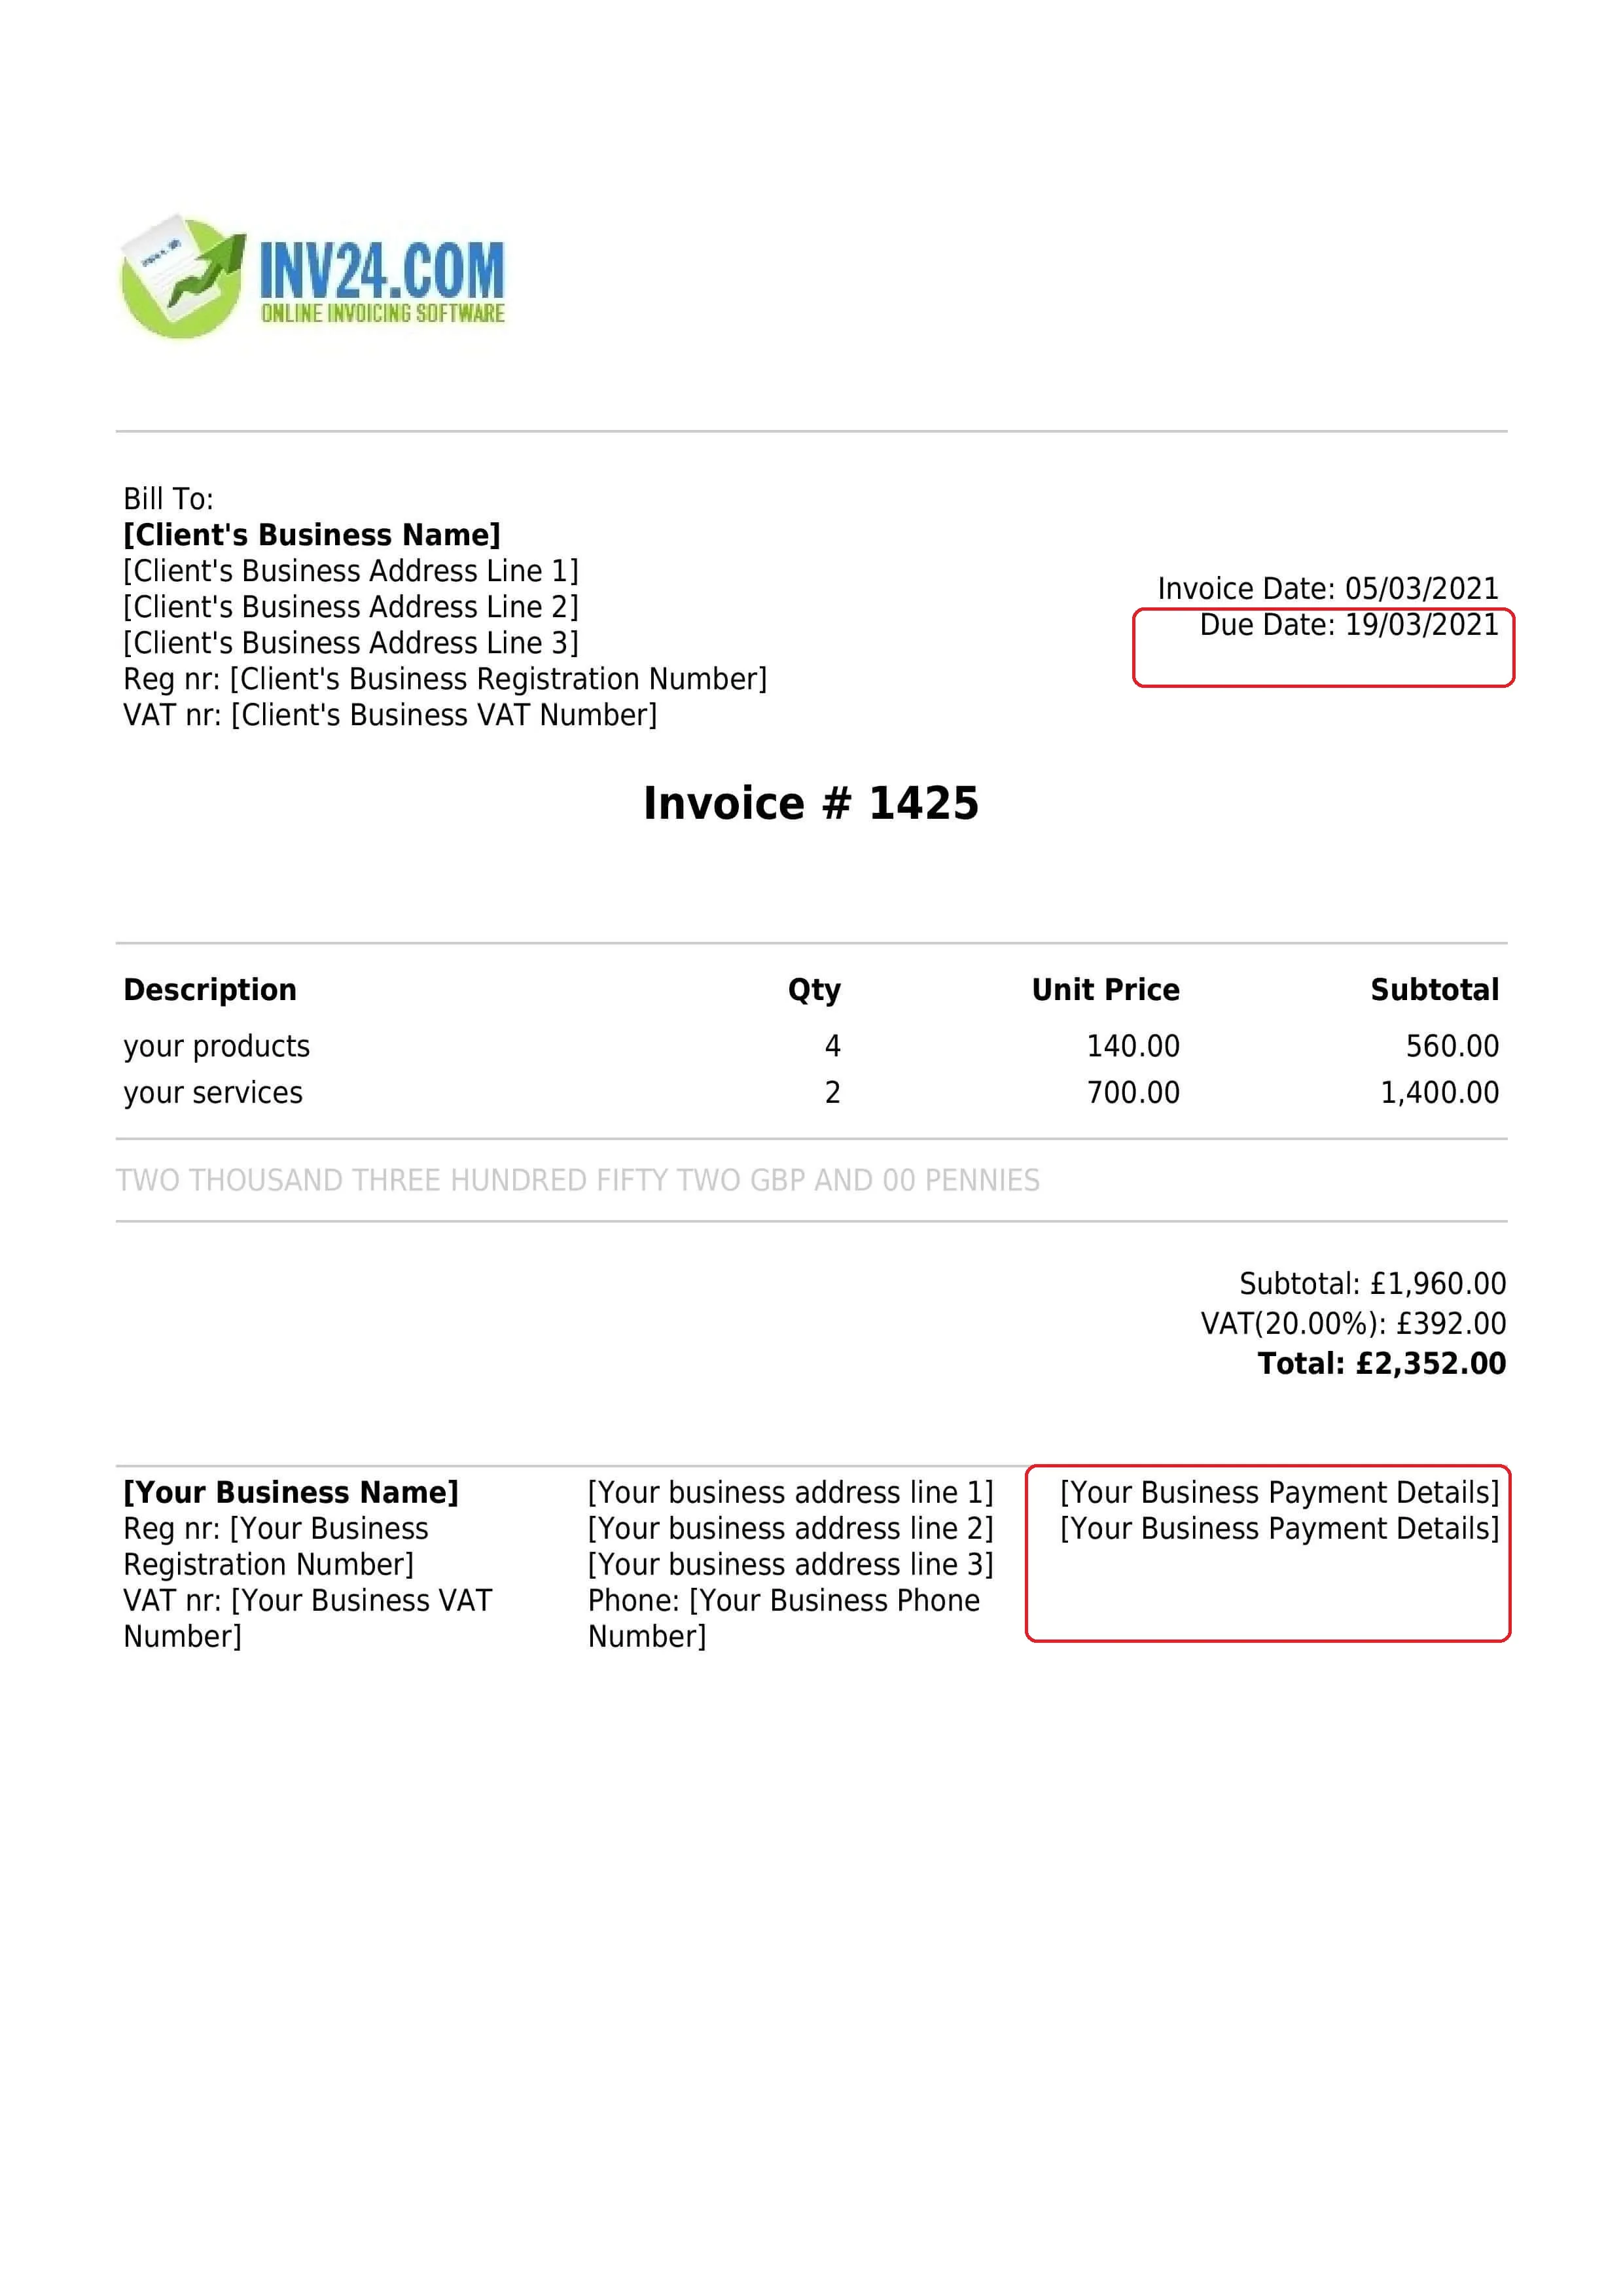 invoice payment terms / payment details